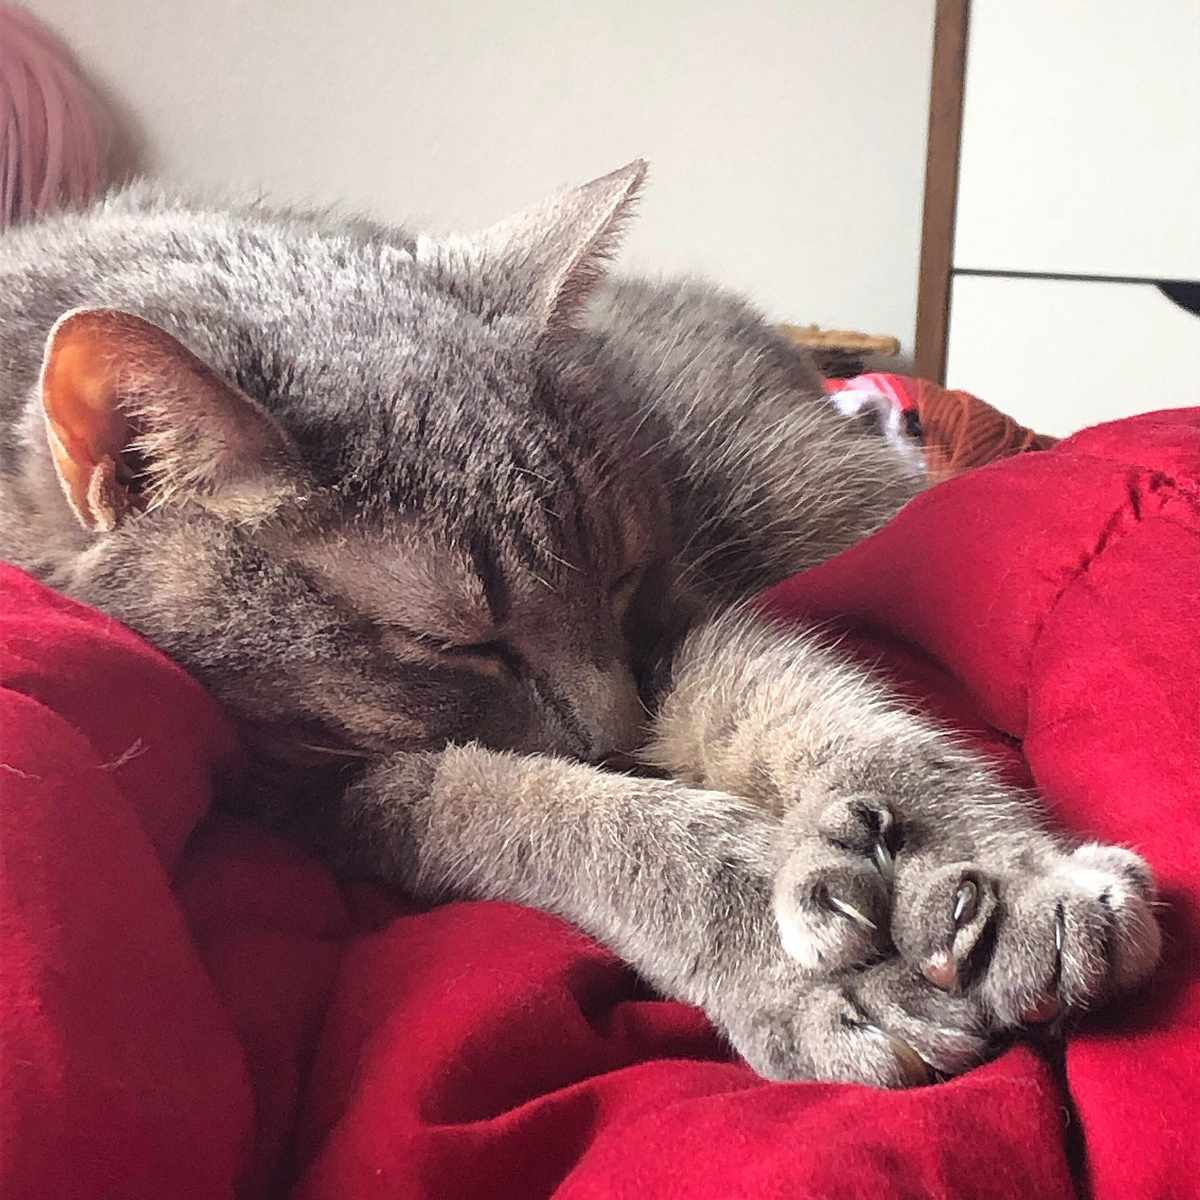 A sleeping gray cat stretches on a red blanket.